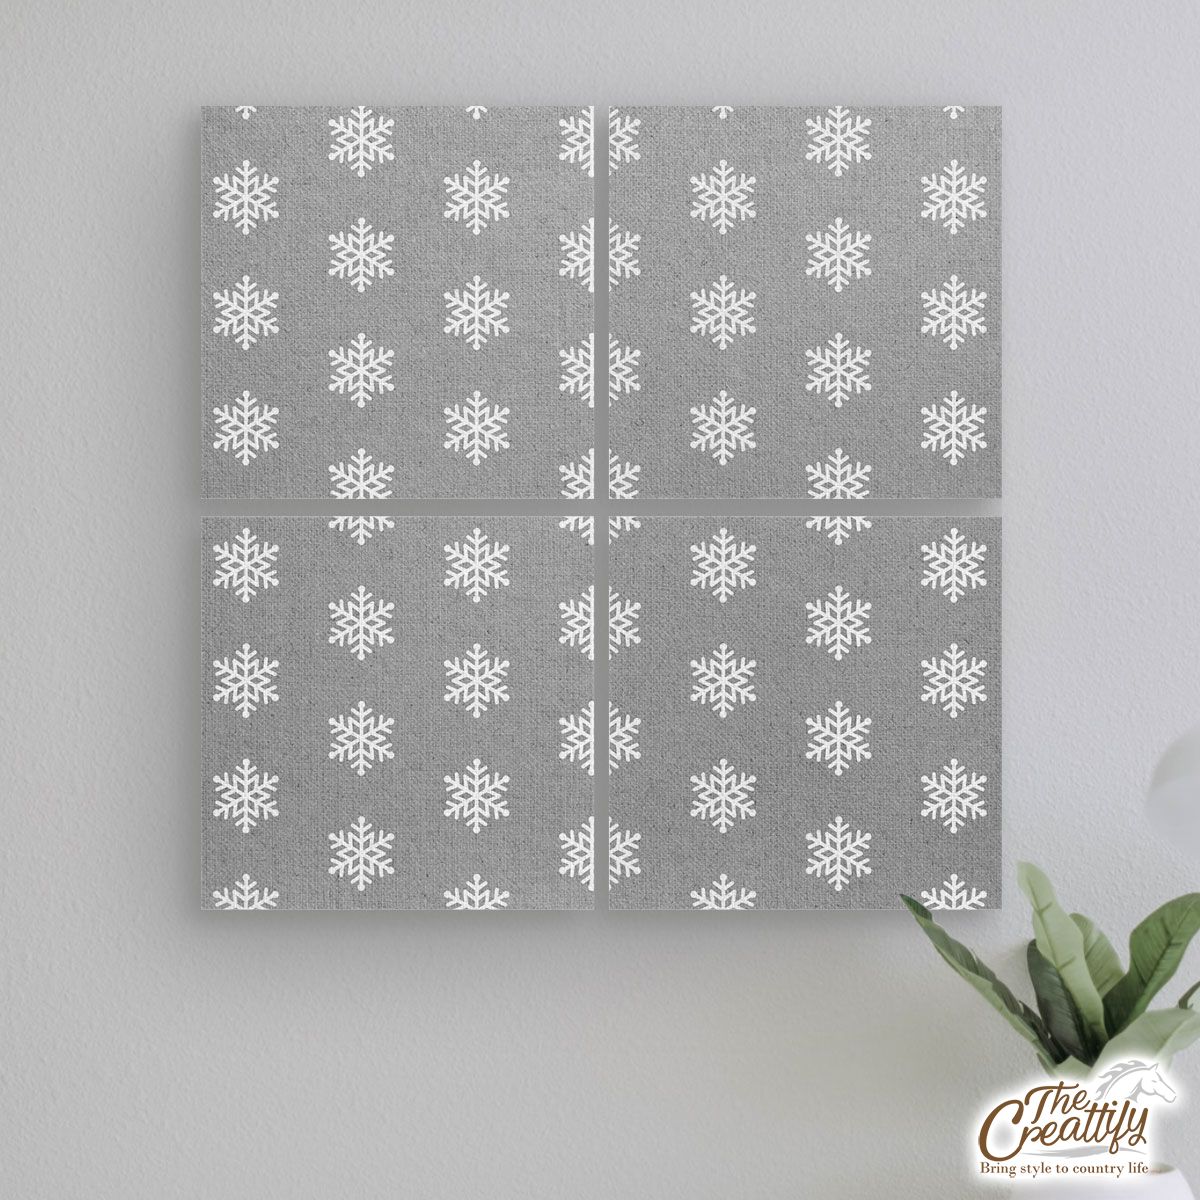 Snowflake Pattern, Christmas Snowflakes, Christmas Present Ideas On Grey Mural With Frame